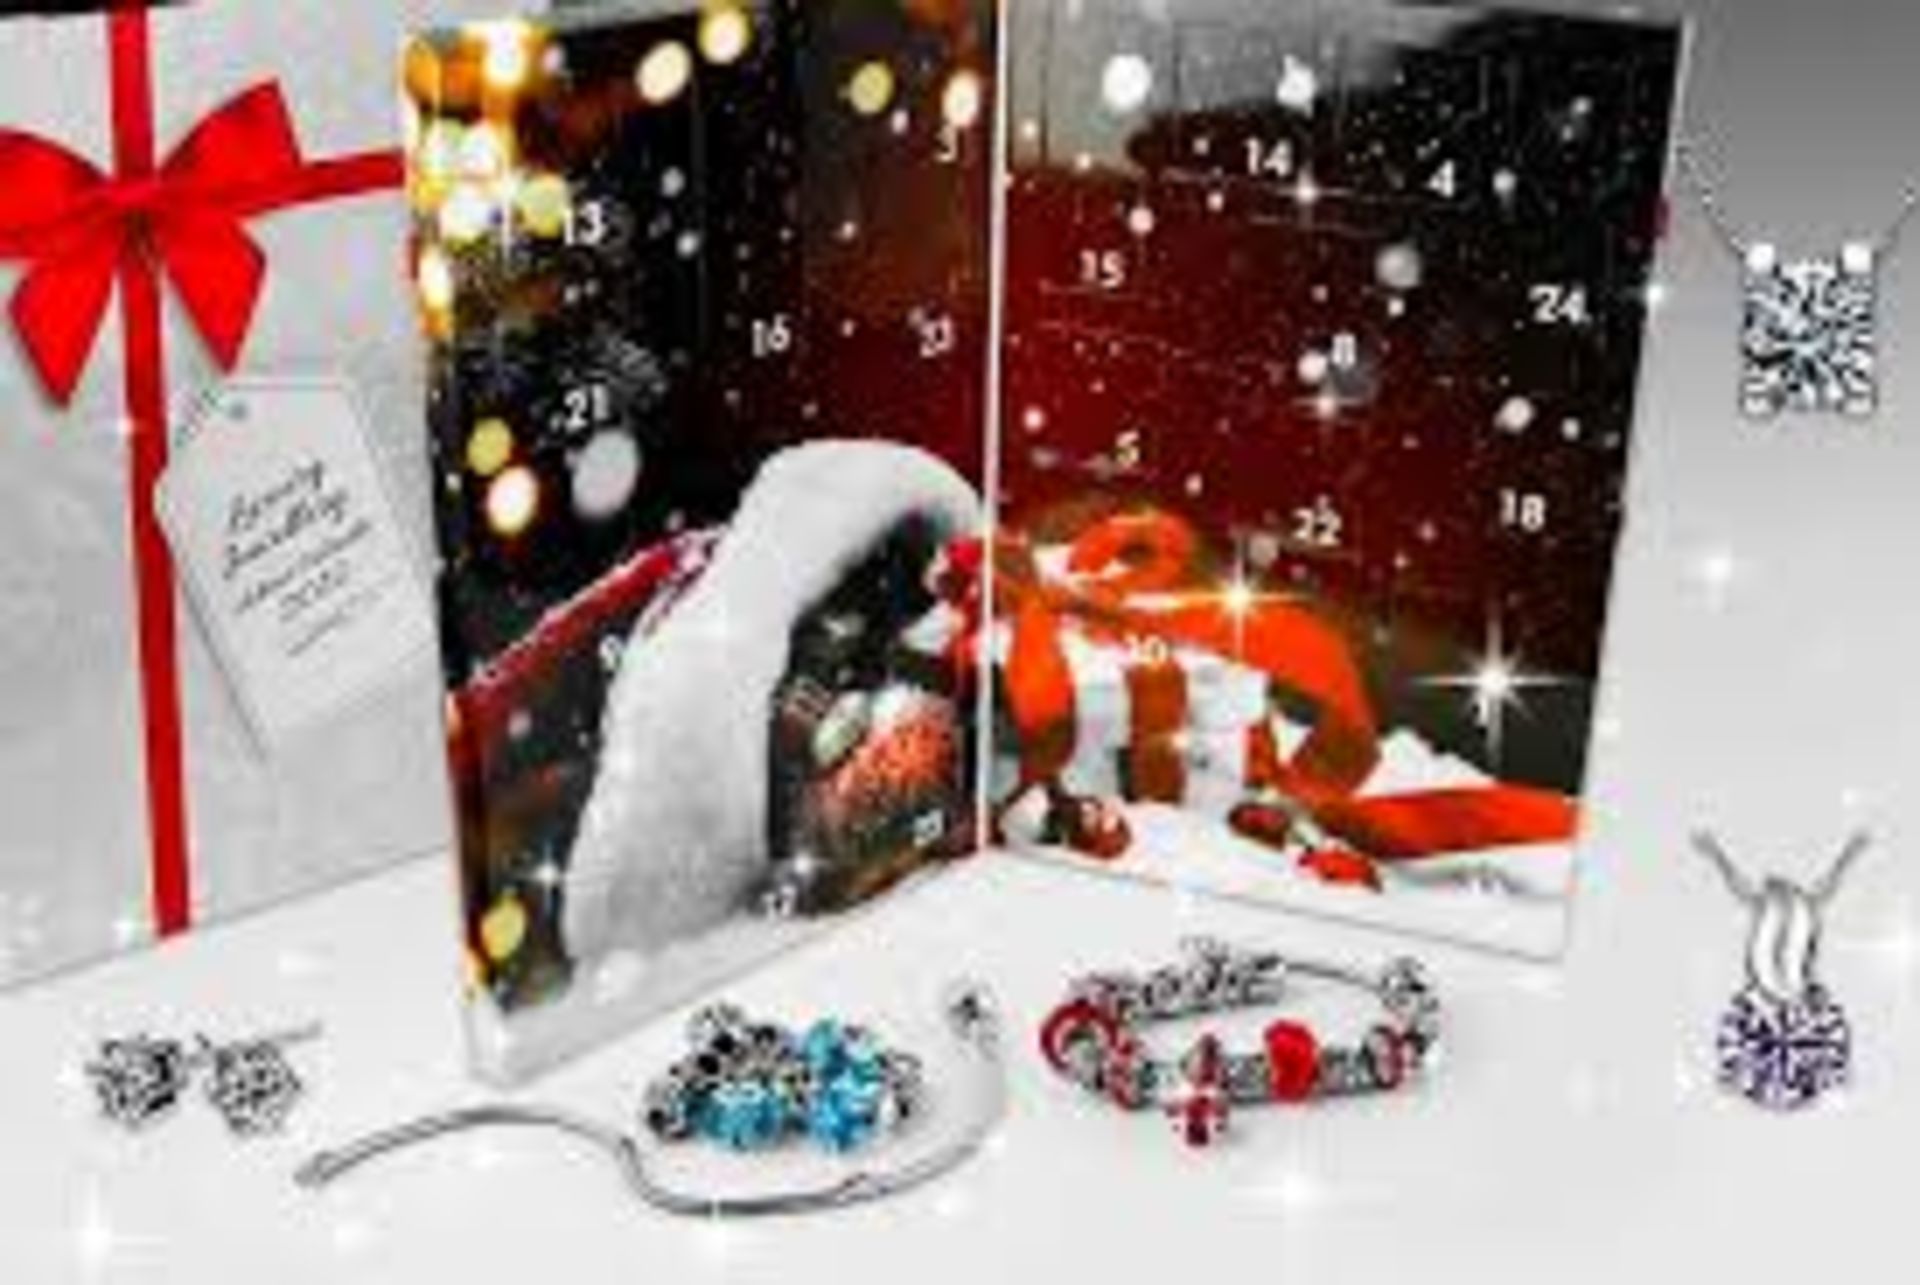 10x NO VAT!! Brand New Fifth NYC Luxury Jewellery Advent Calender, RRP £199, The ideal Christmas